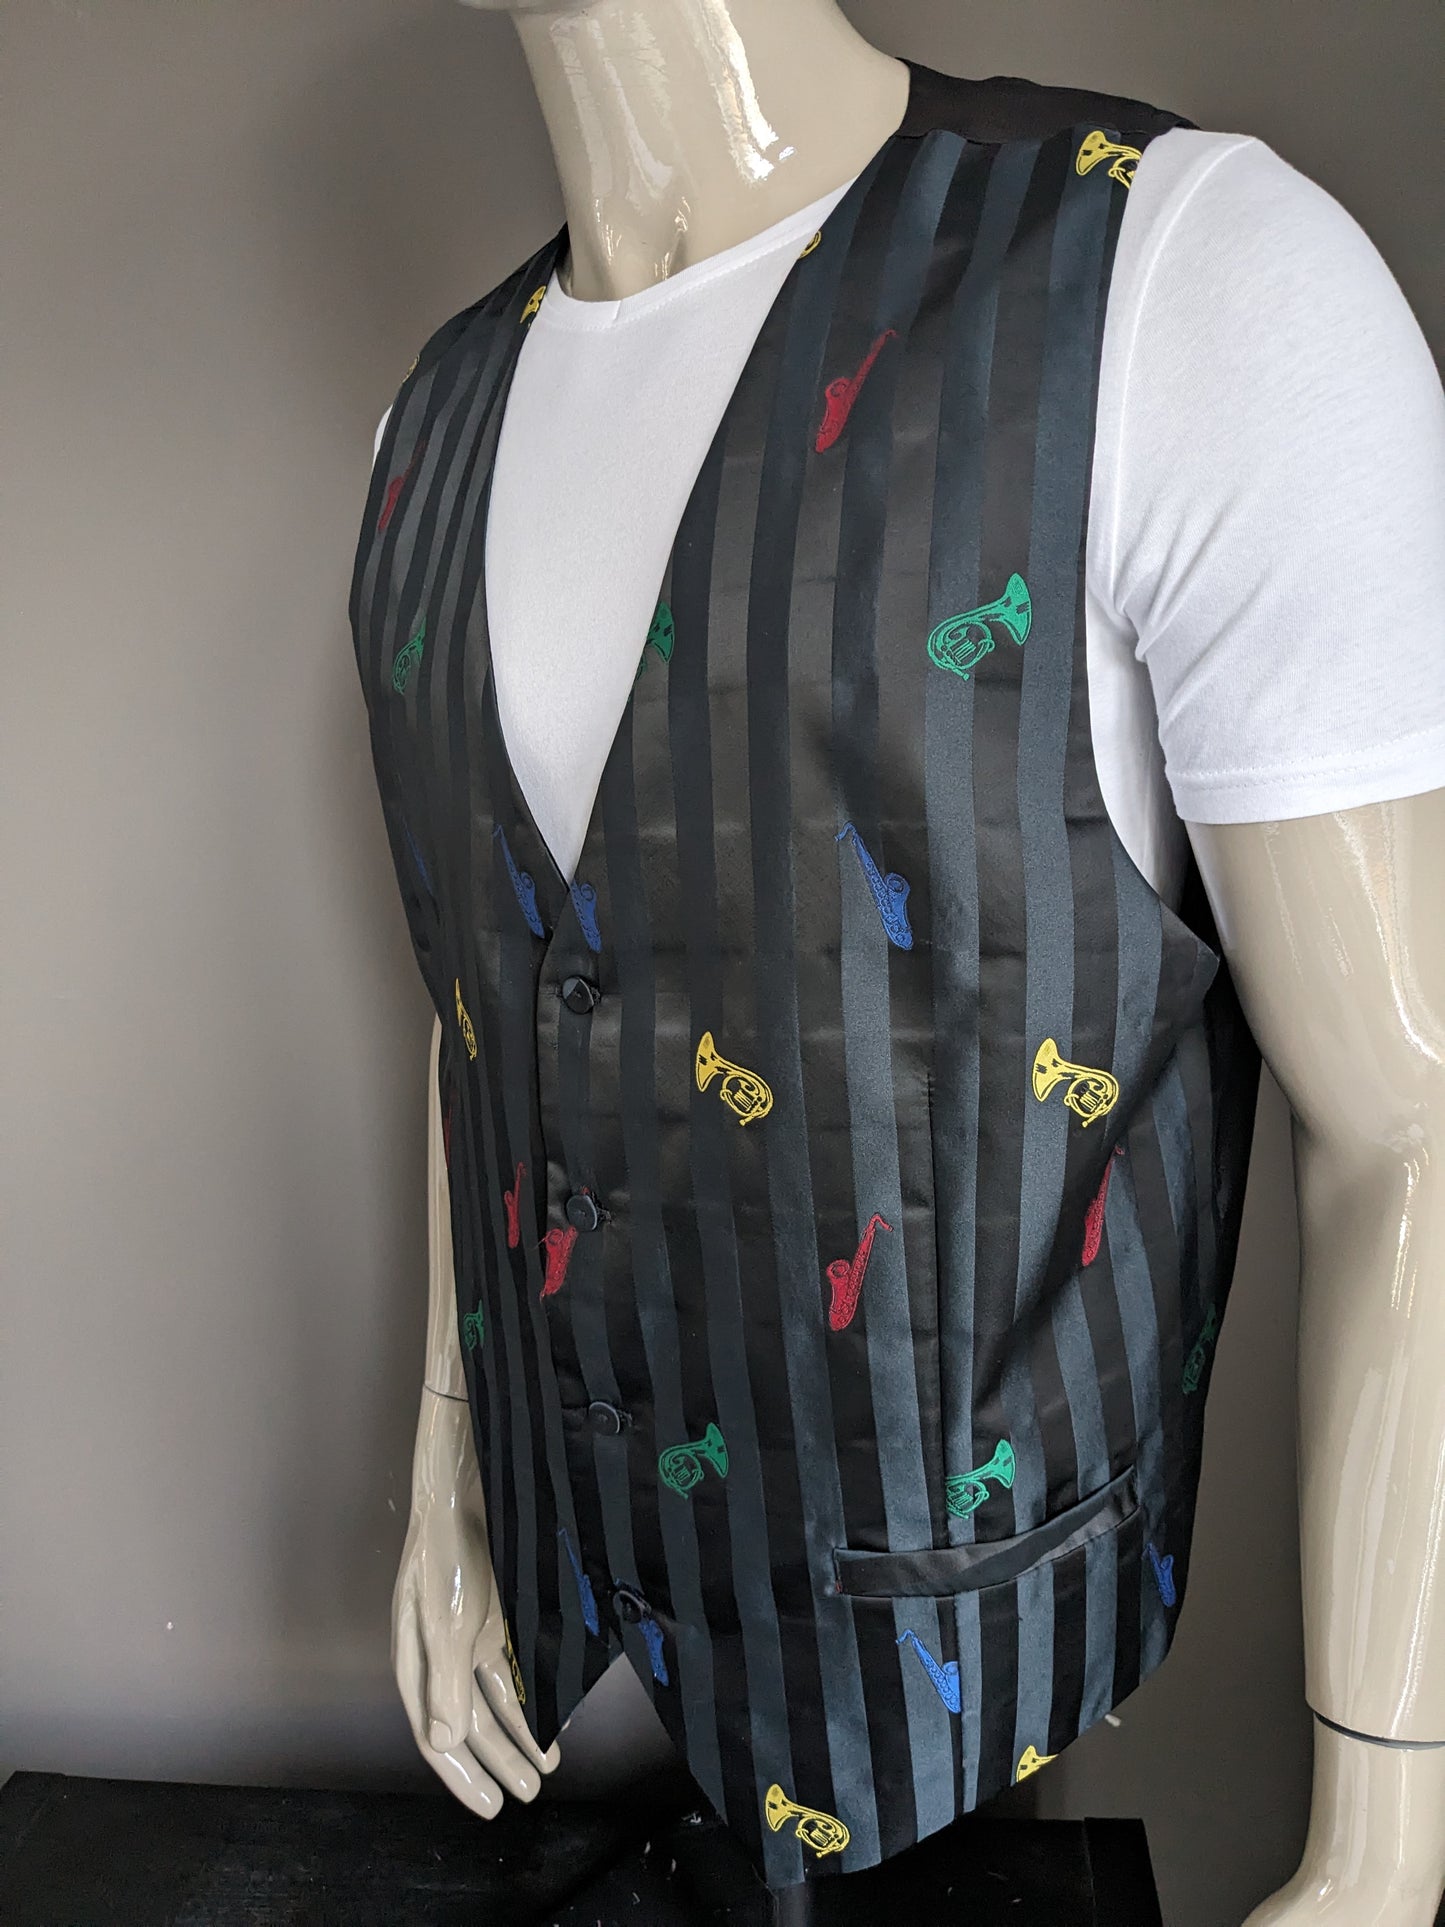 Mohair waistcoat. Black shiny striped with colored instruments print. Size XL.